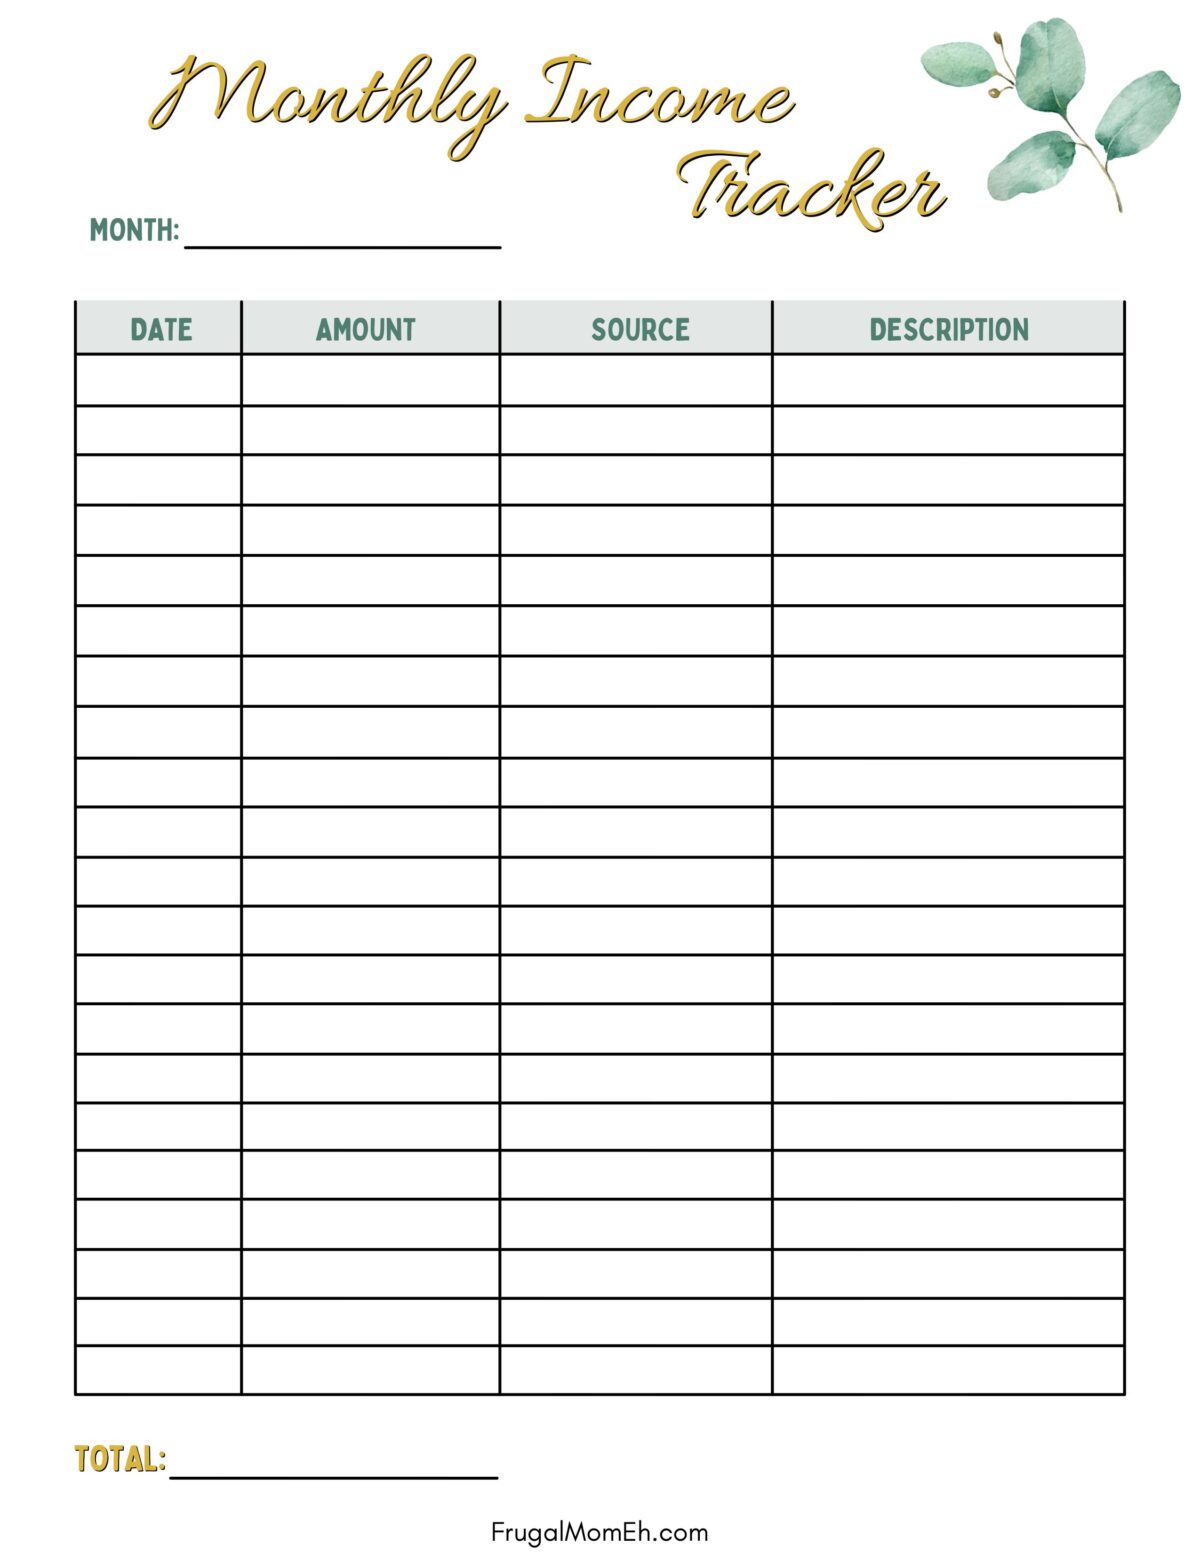 Monthly Income Tracker Sheet